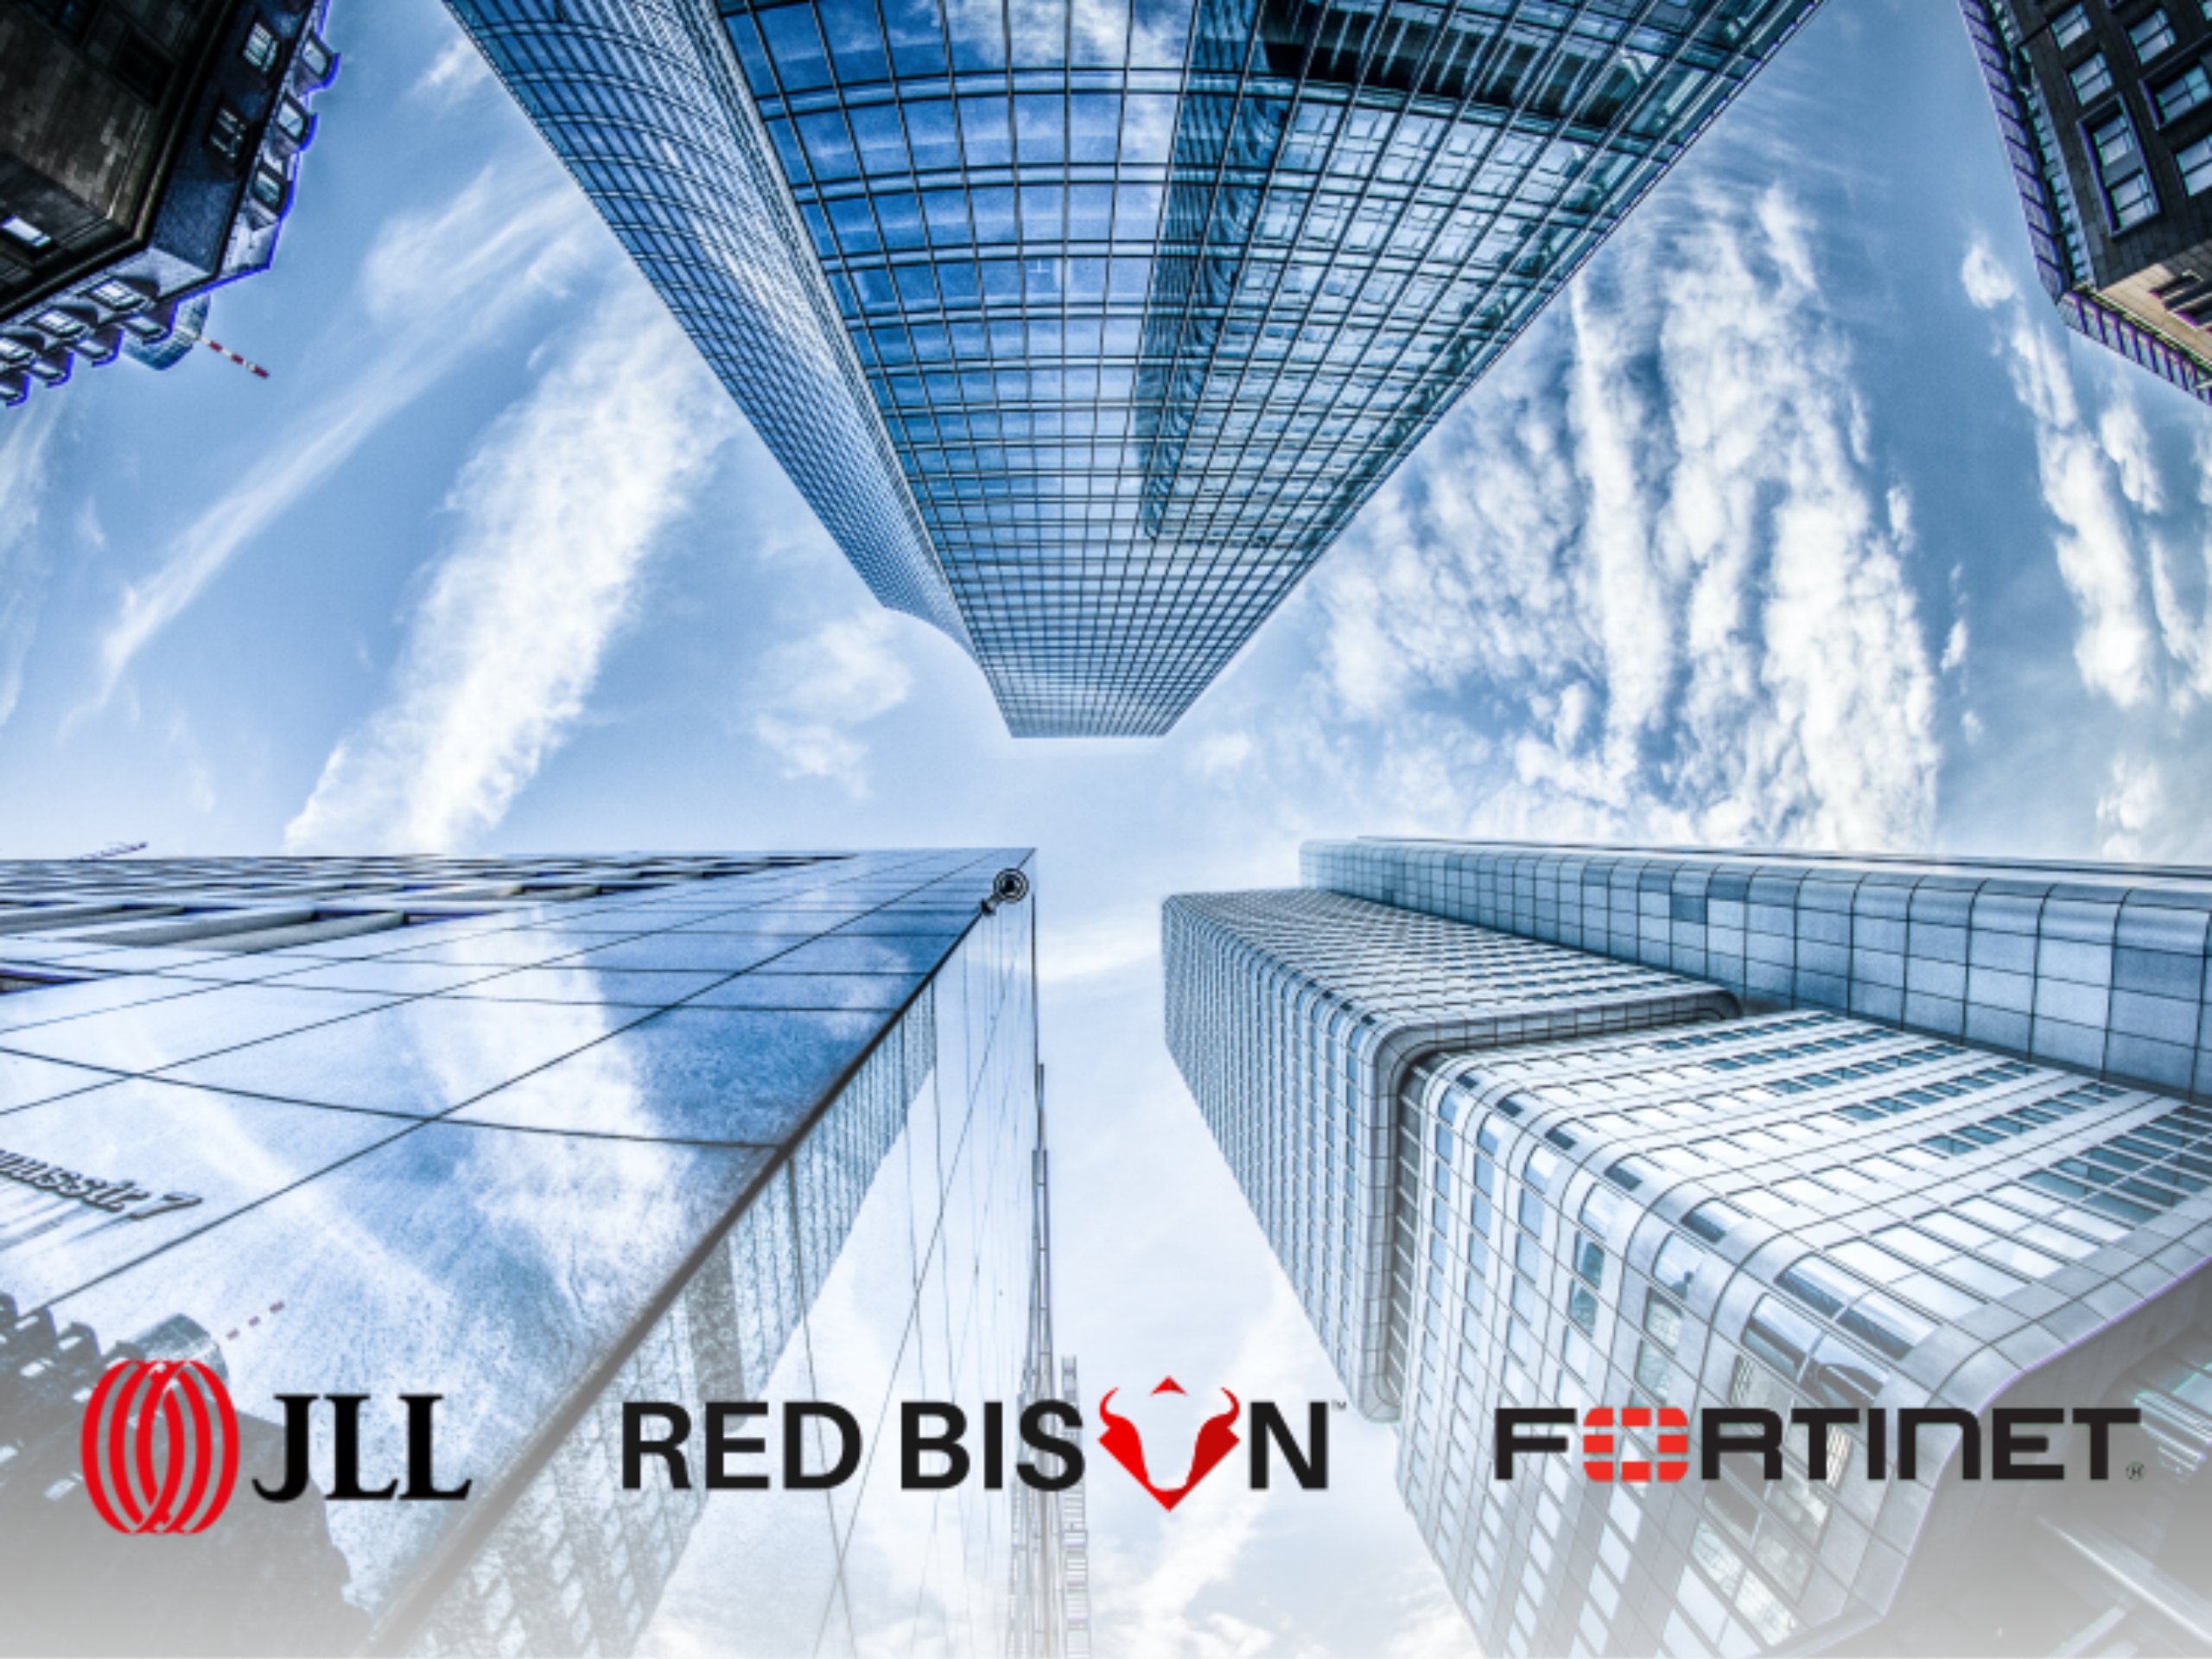 Picture of three tall business sky scrapers, Logos: JLL, Red Bison, Fortinet